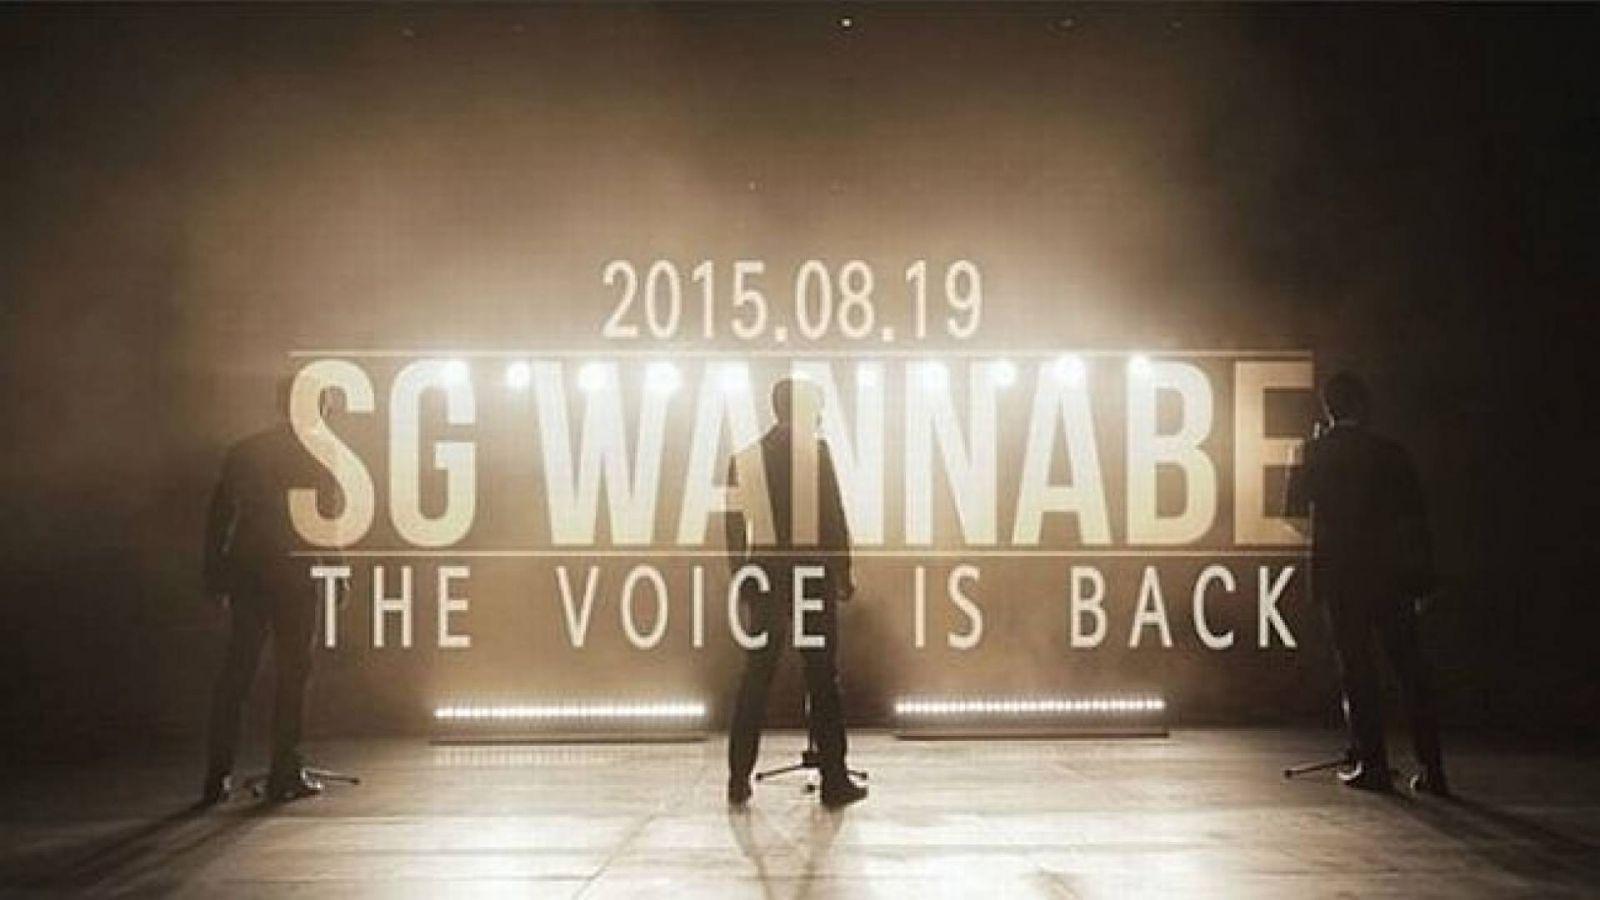 SG Wannabe's comeback confirmed! © SG Wannabe Official Facebook Page